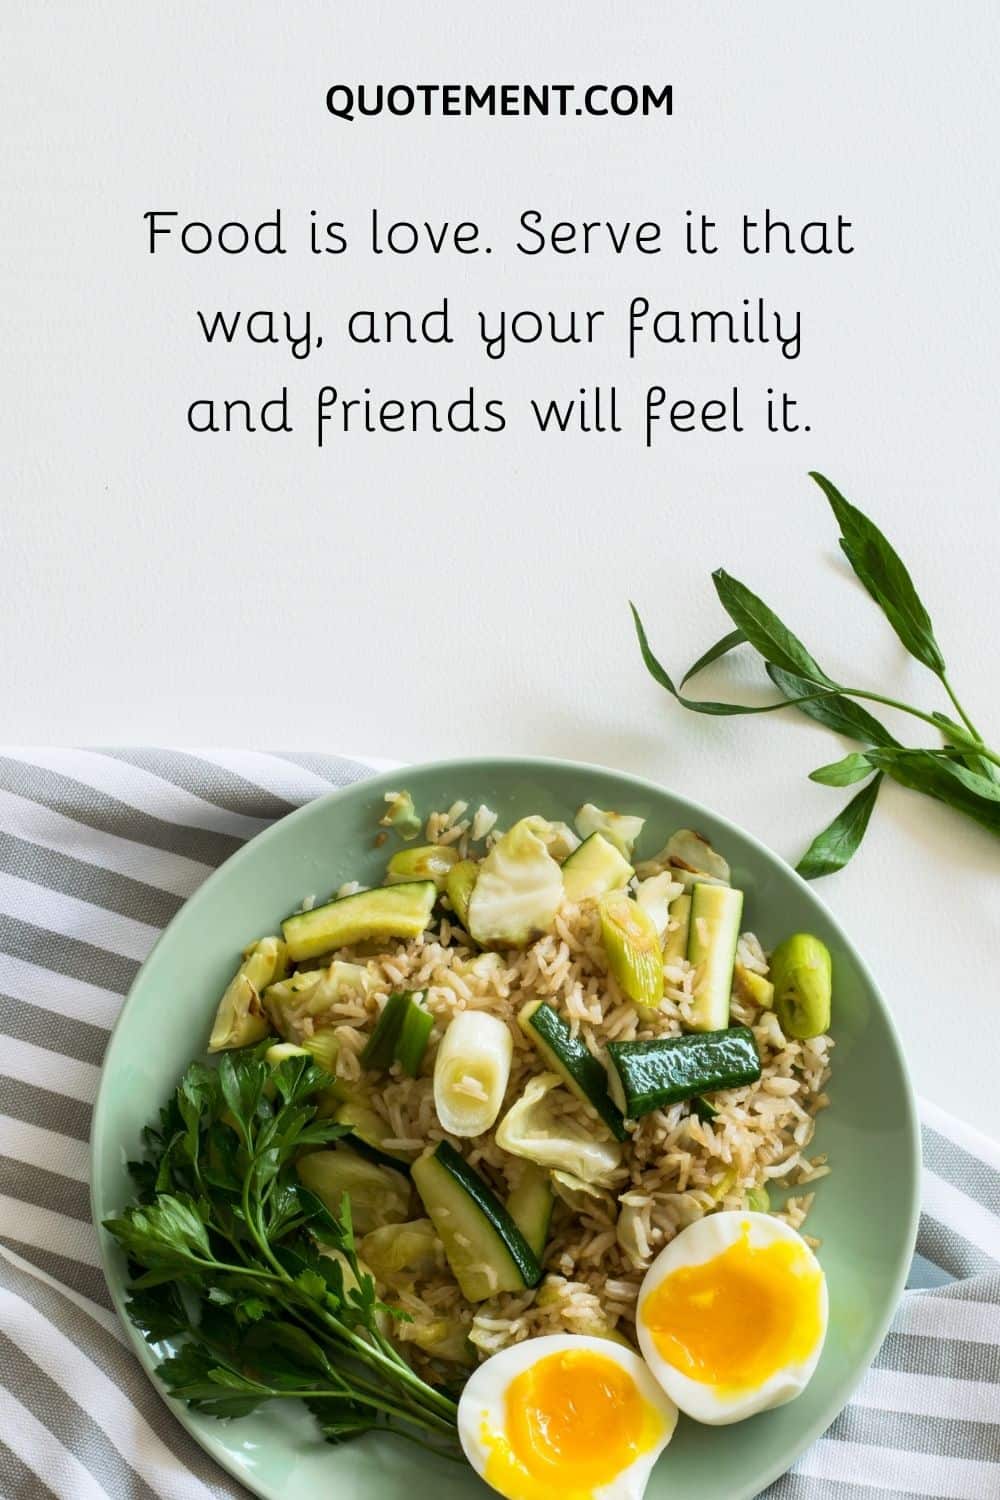 Food is love. Serve it that way, and your family and friends will feel it